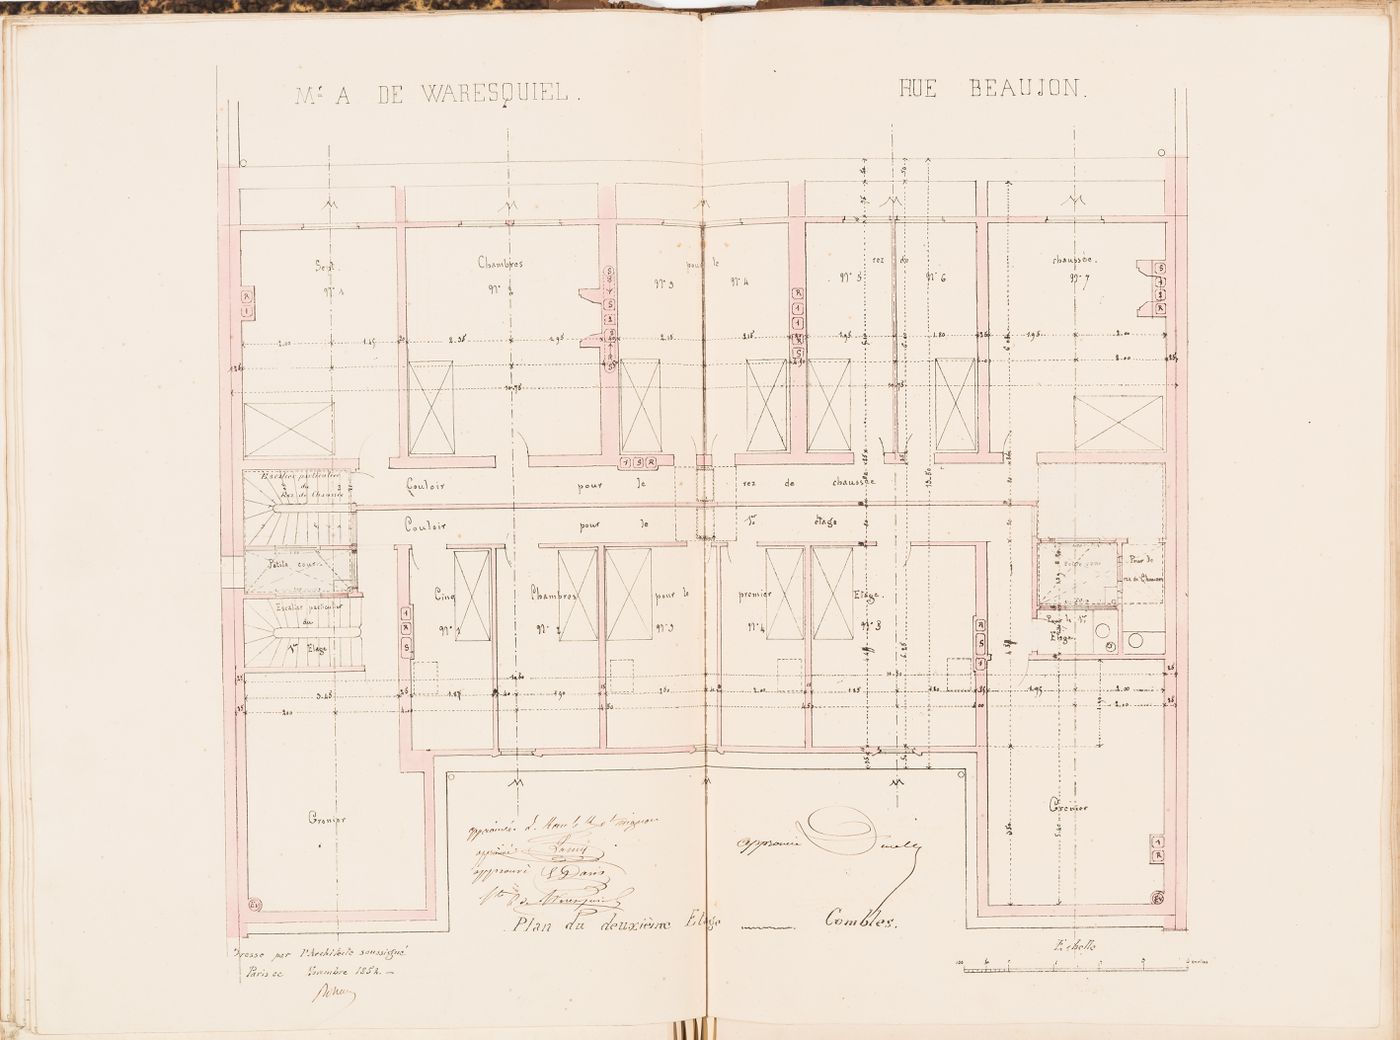 Contract drawing for a house for Monsieur A. Waresquiel, rue Beaujon, Paris: Second floor plan